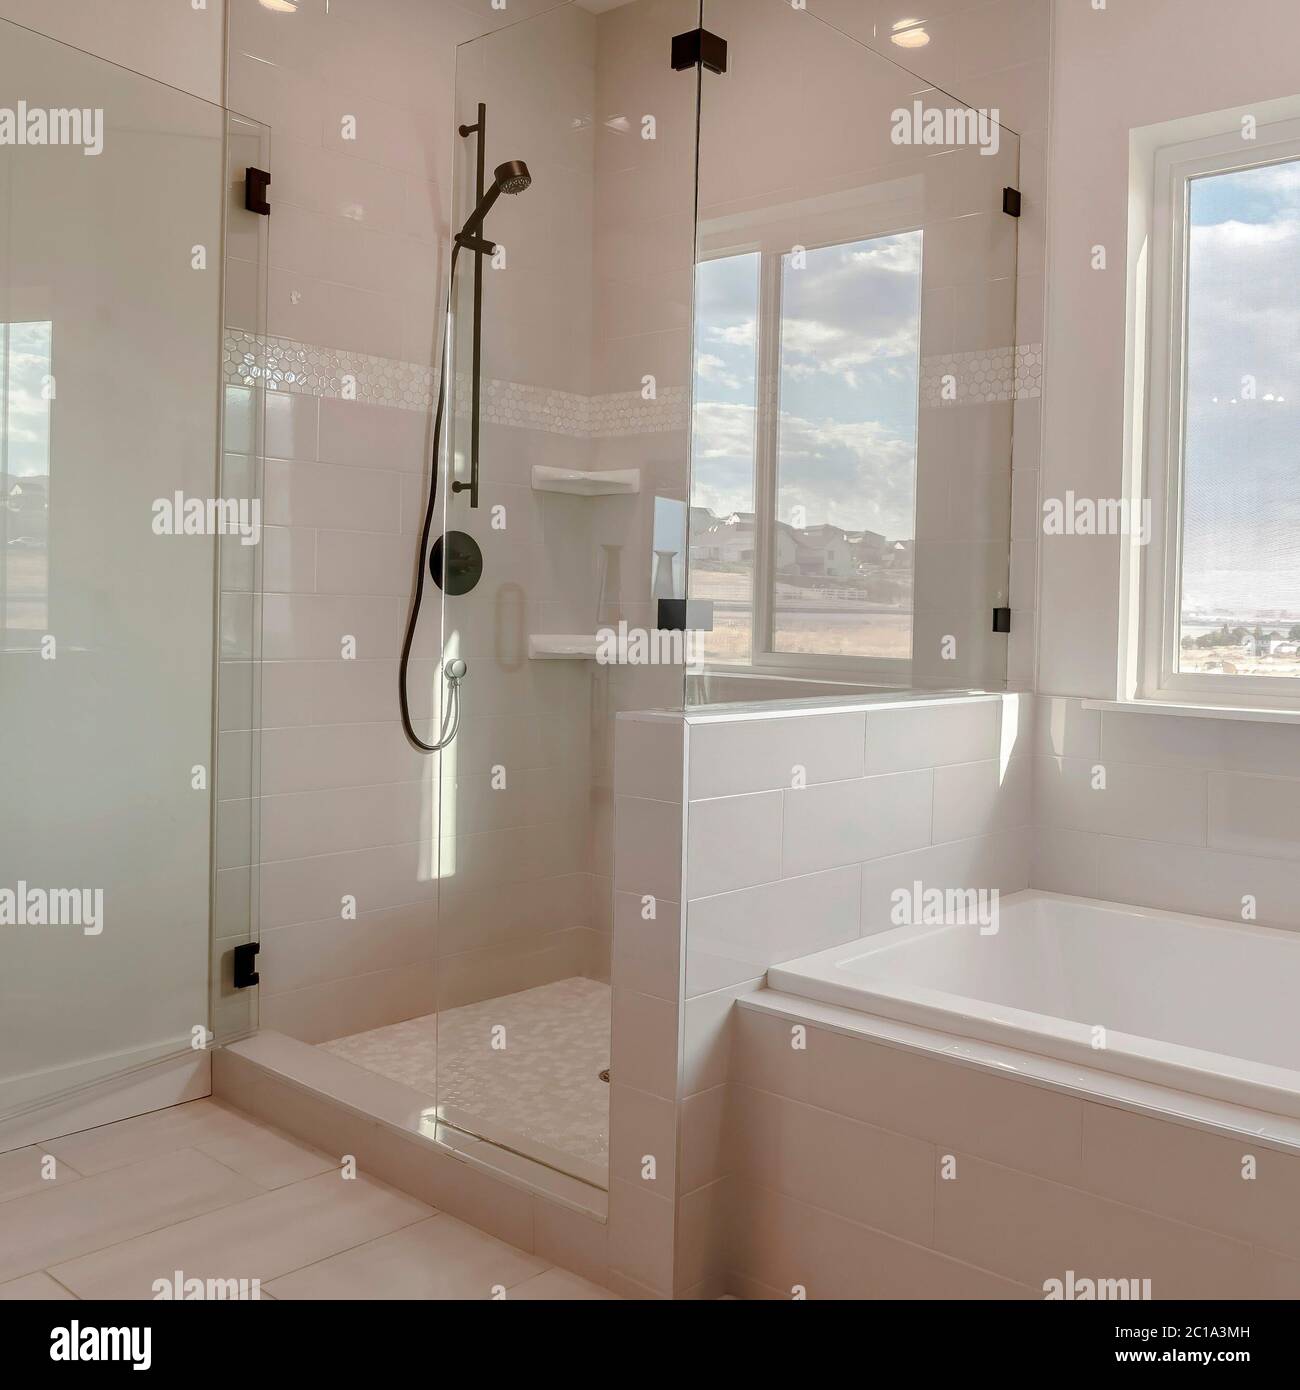 Square Built in bathtub with black faucet and shower stall with half glass enclosure Stock Photo